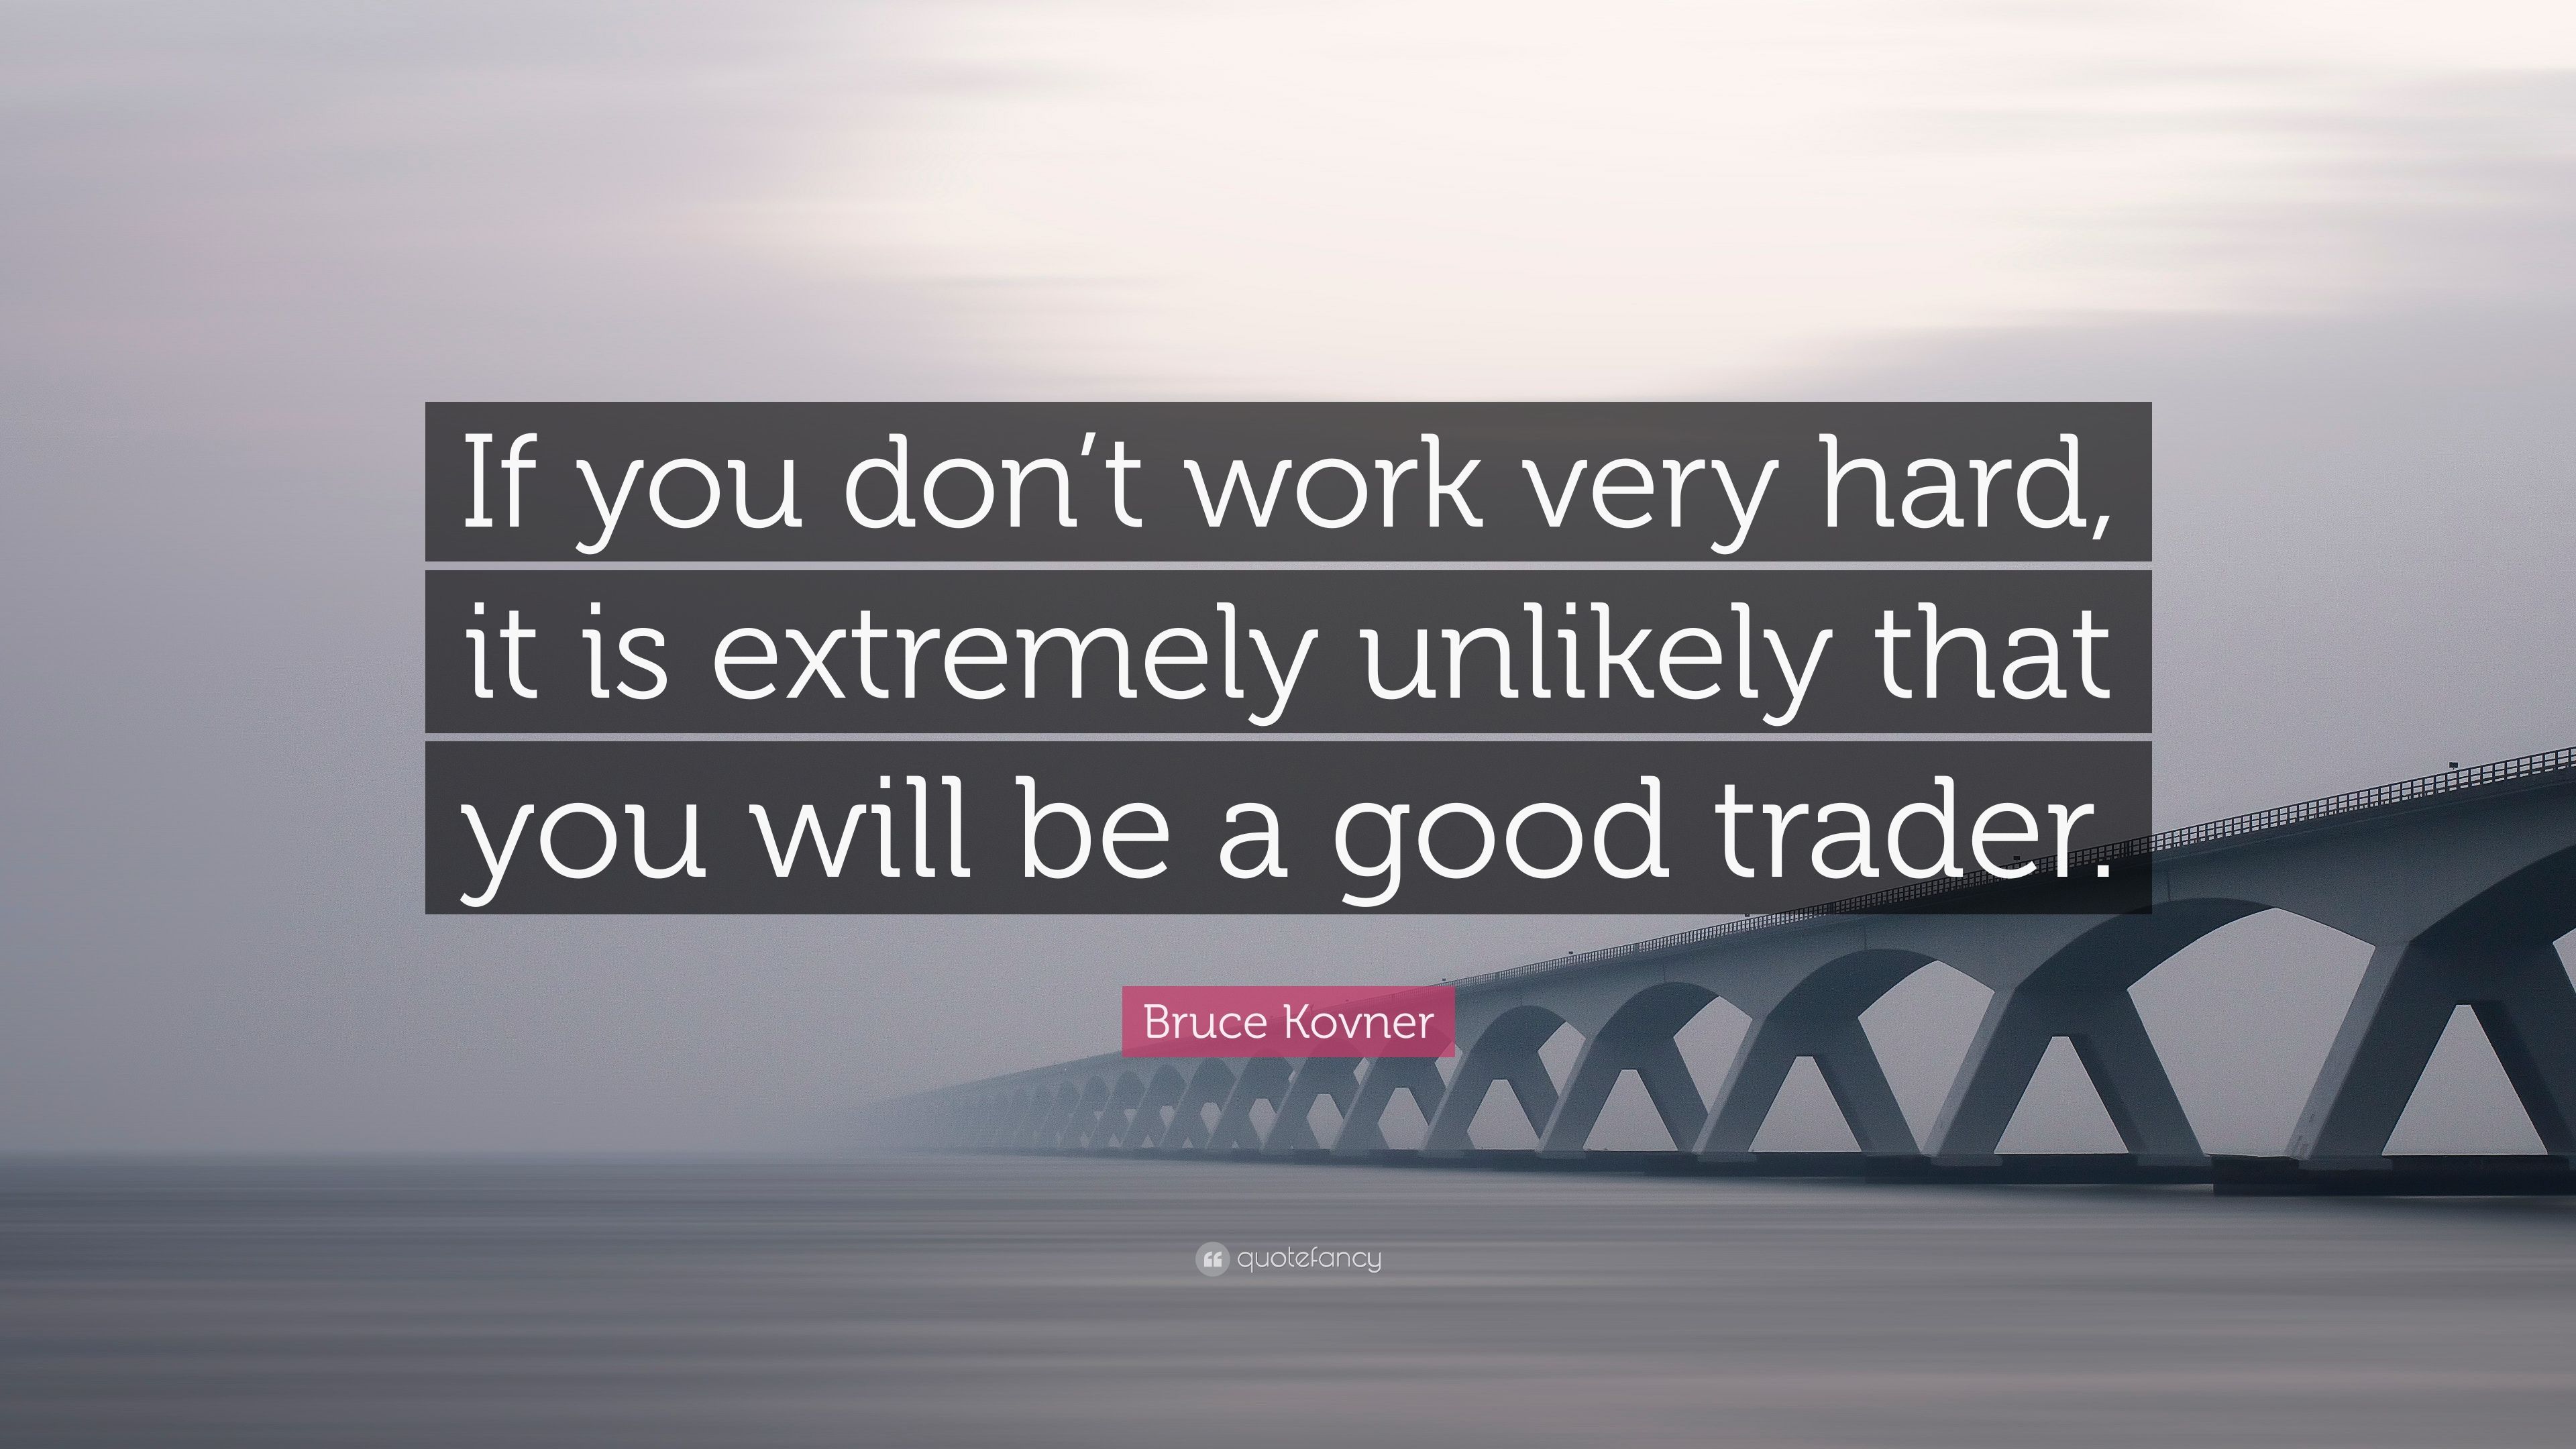 Bruce Kovner Quote: “If you don't work very hard, it is extremely unlikely  that you